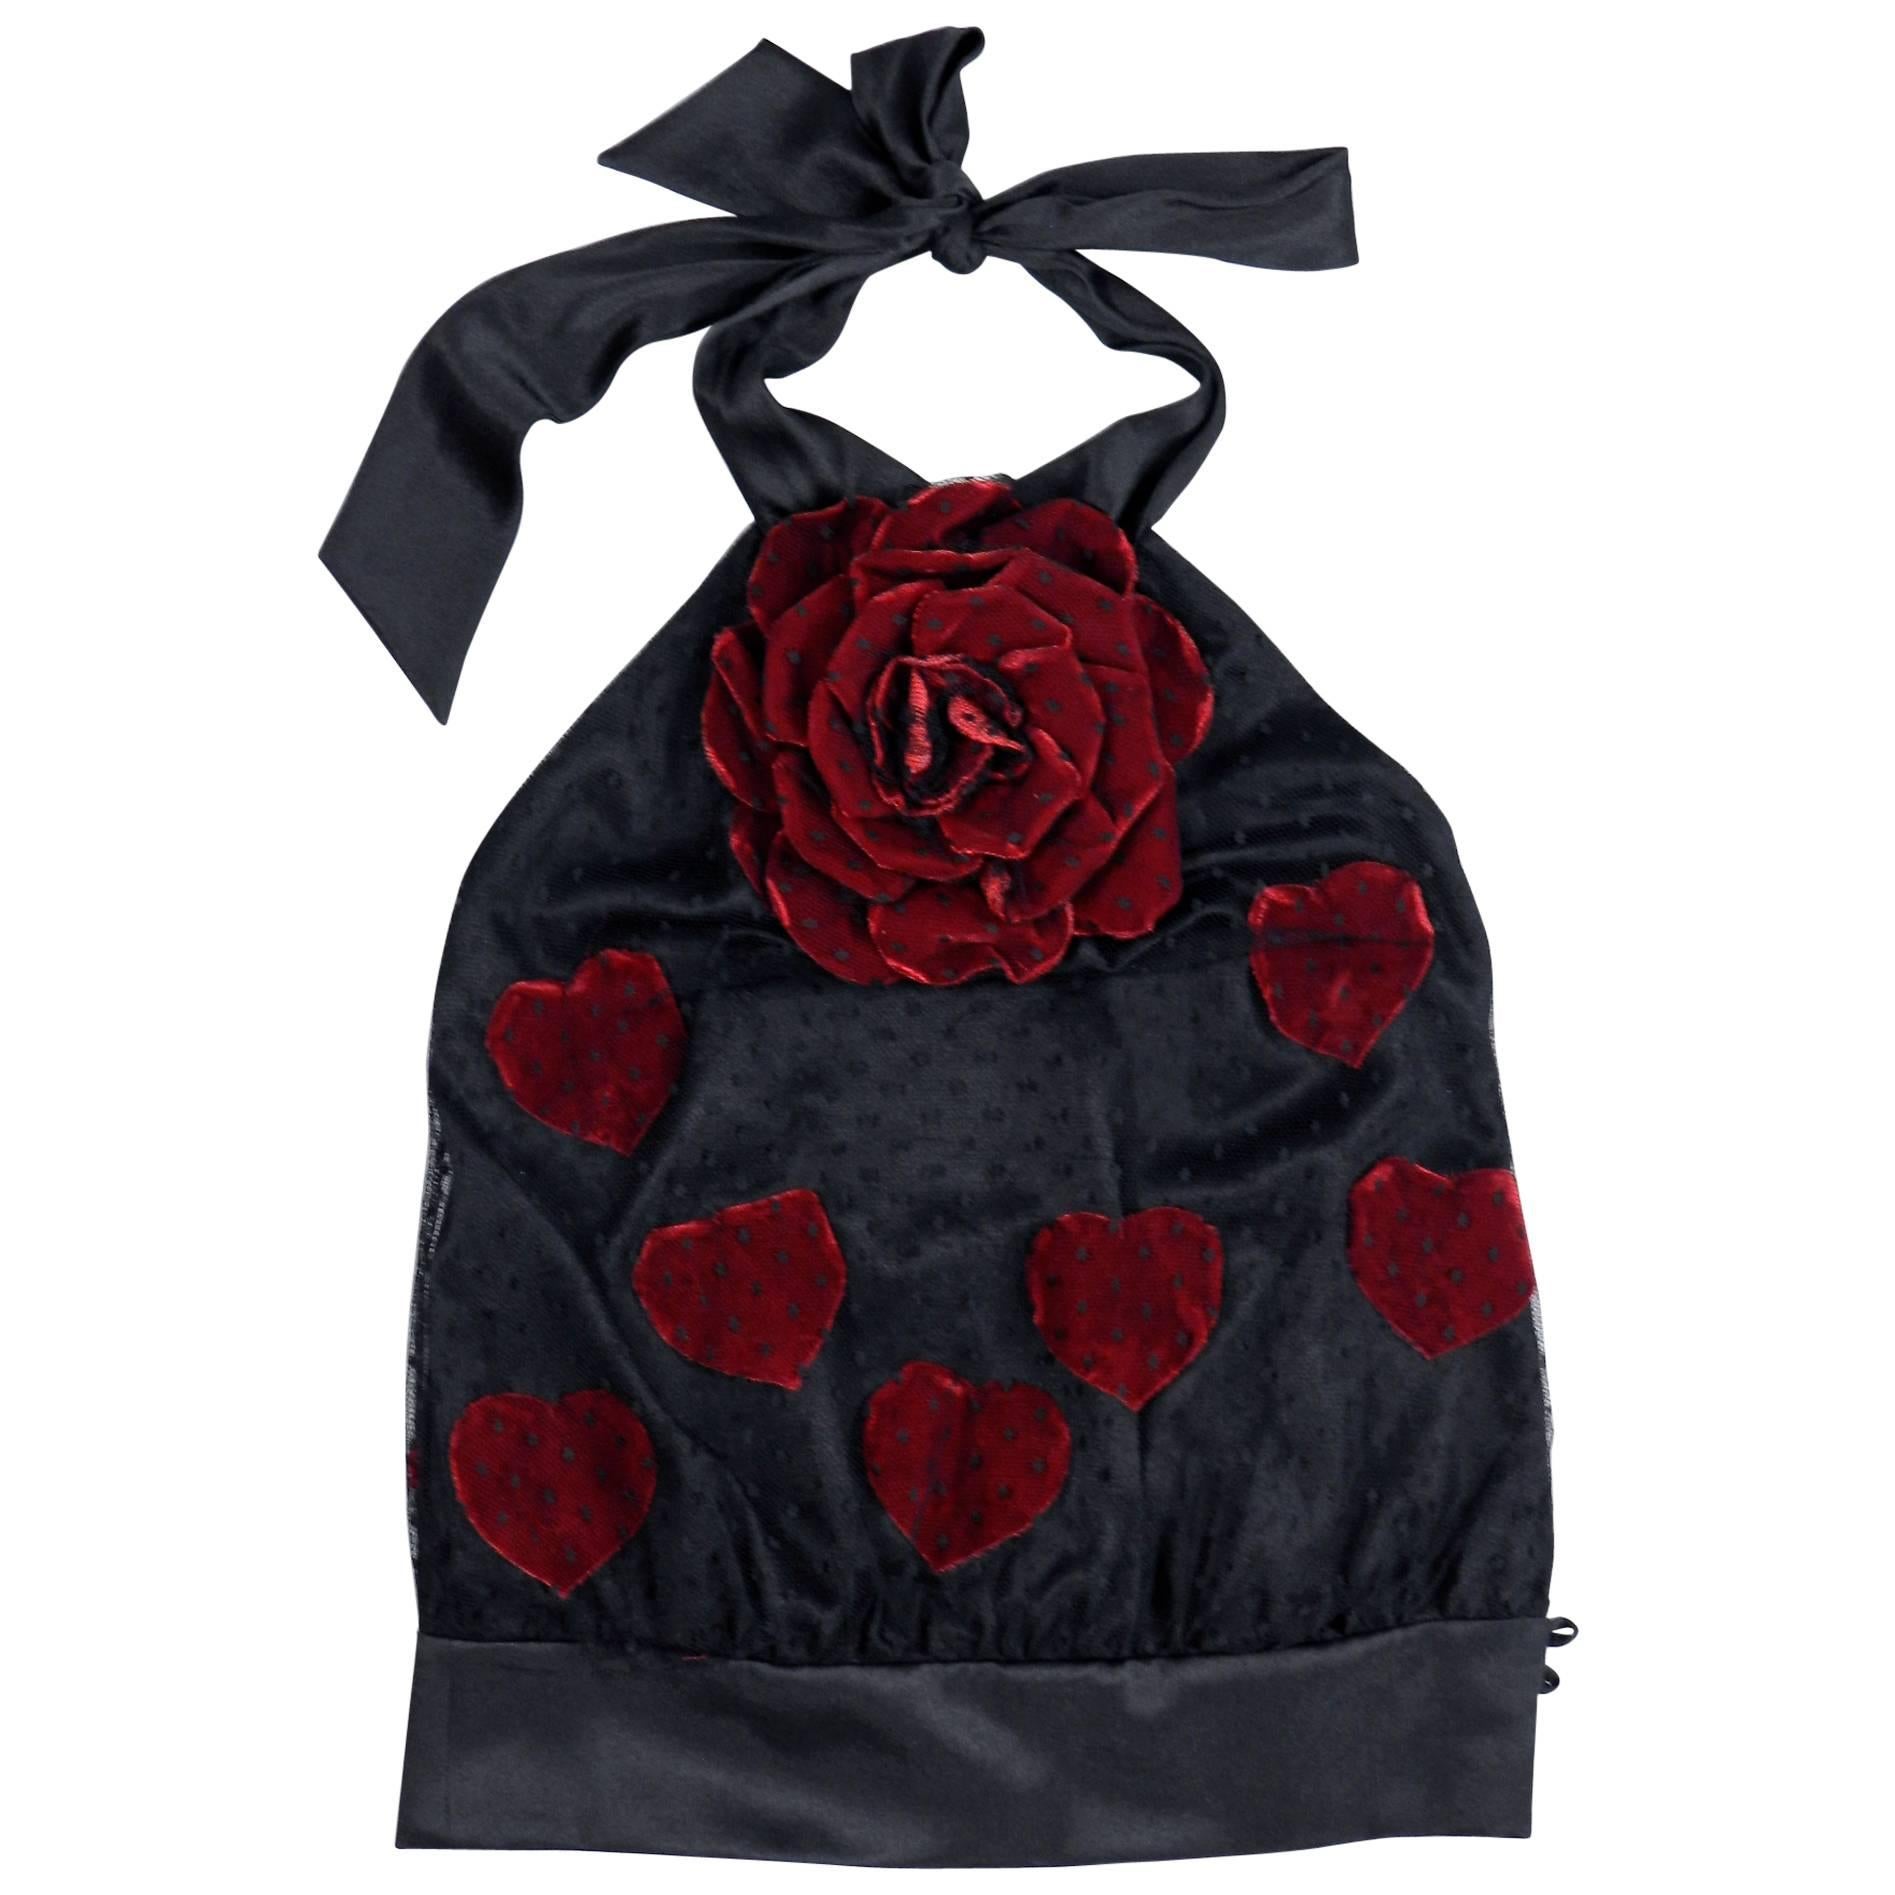 Moschino black lace halter top with red velvet rose and hearts